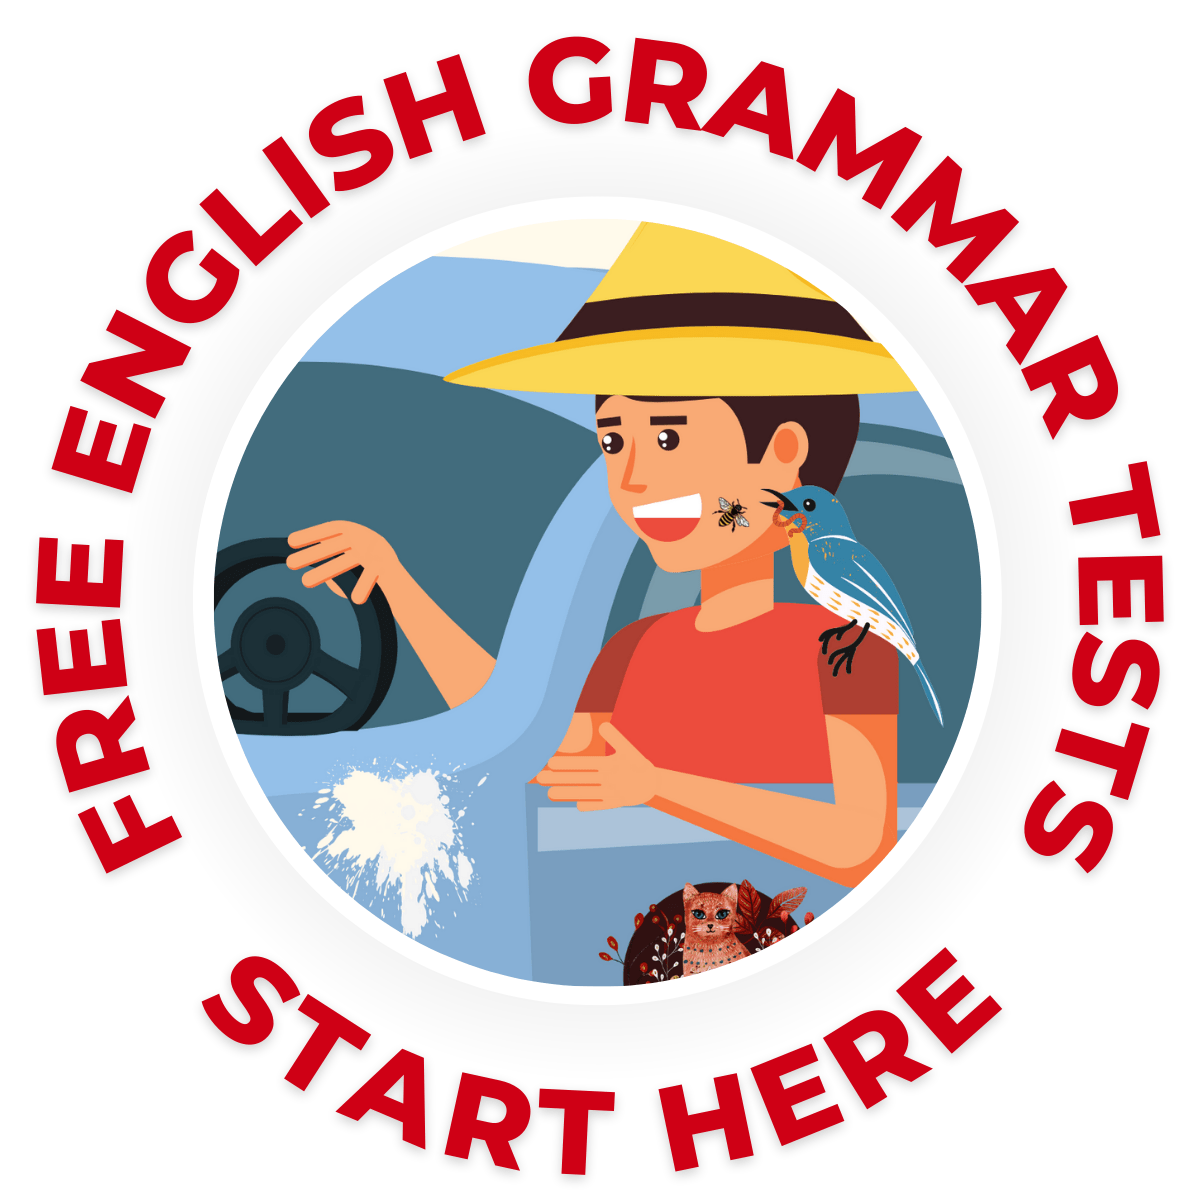 learn-english-online-flexible-course